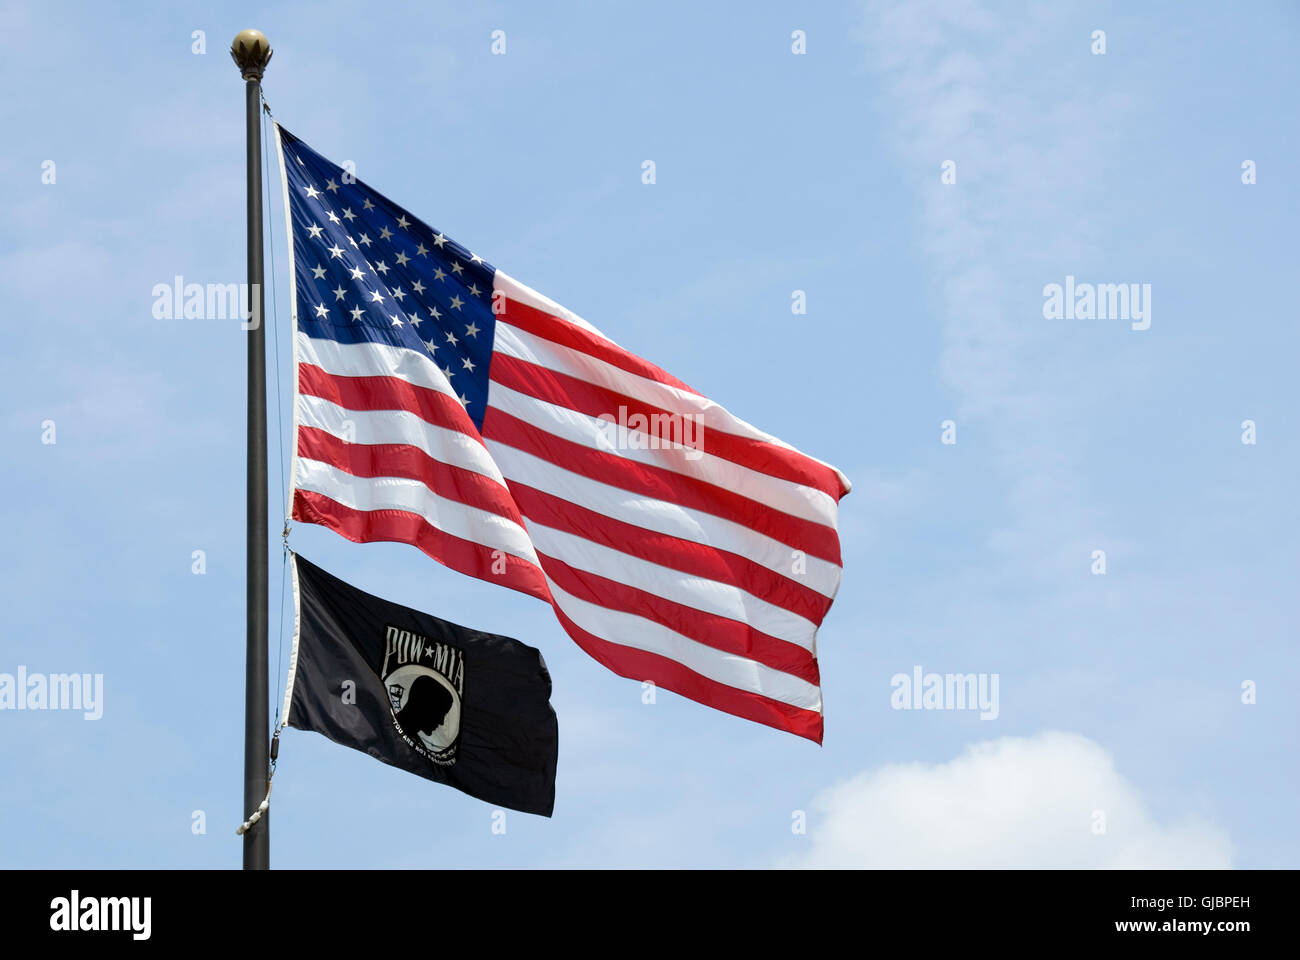 The flags of the United States of America and its POW-MIA organization flying together in Washington, DC. Stock Photo